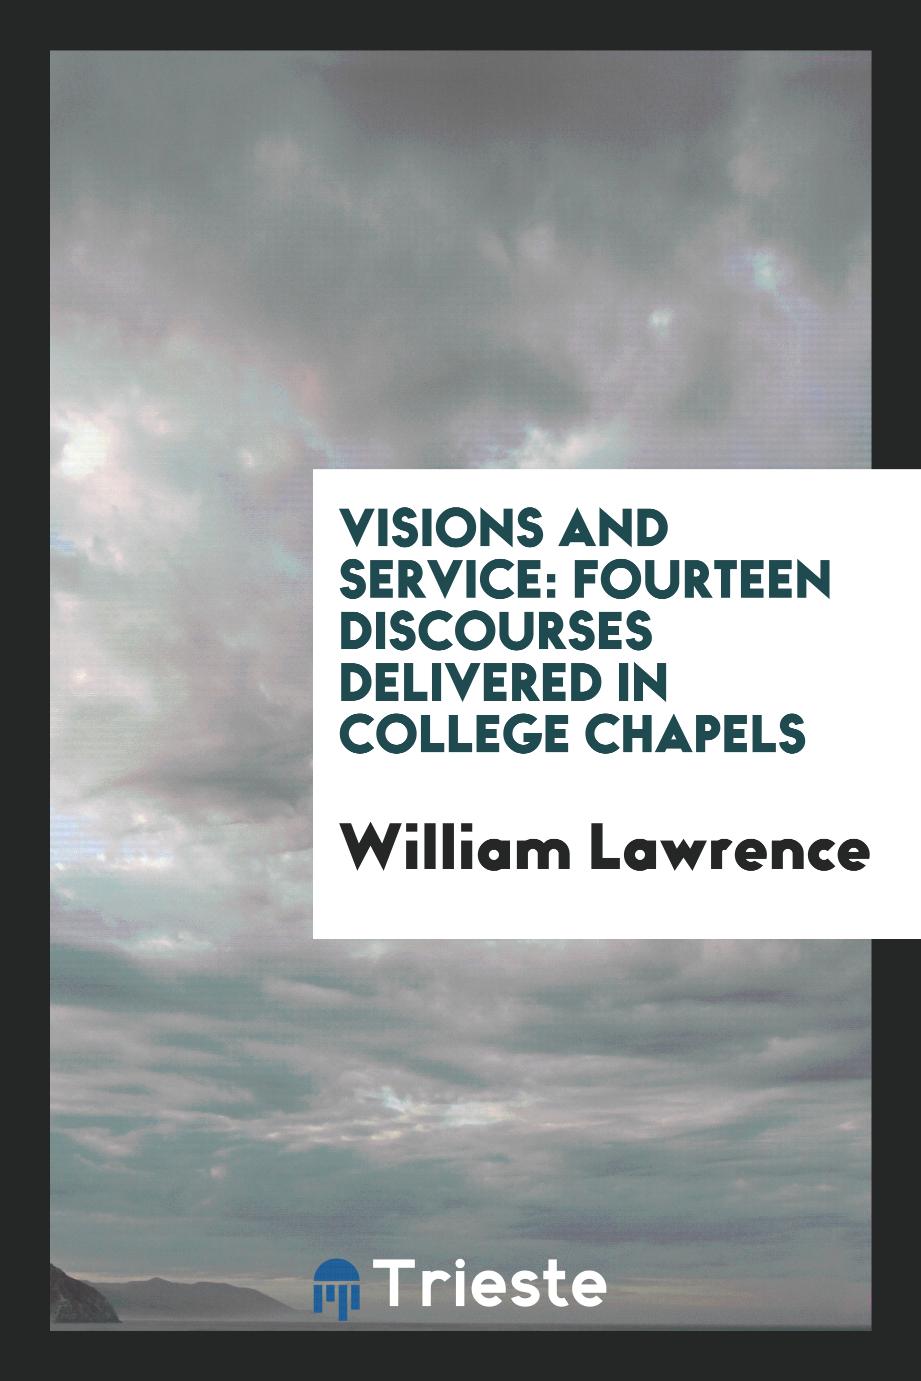 Visions and service: fourteen discourses delivered in college chapels